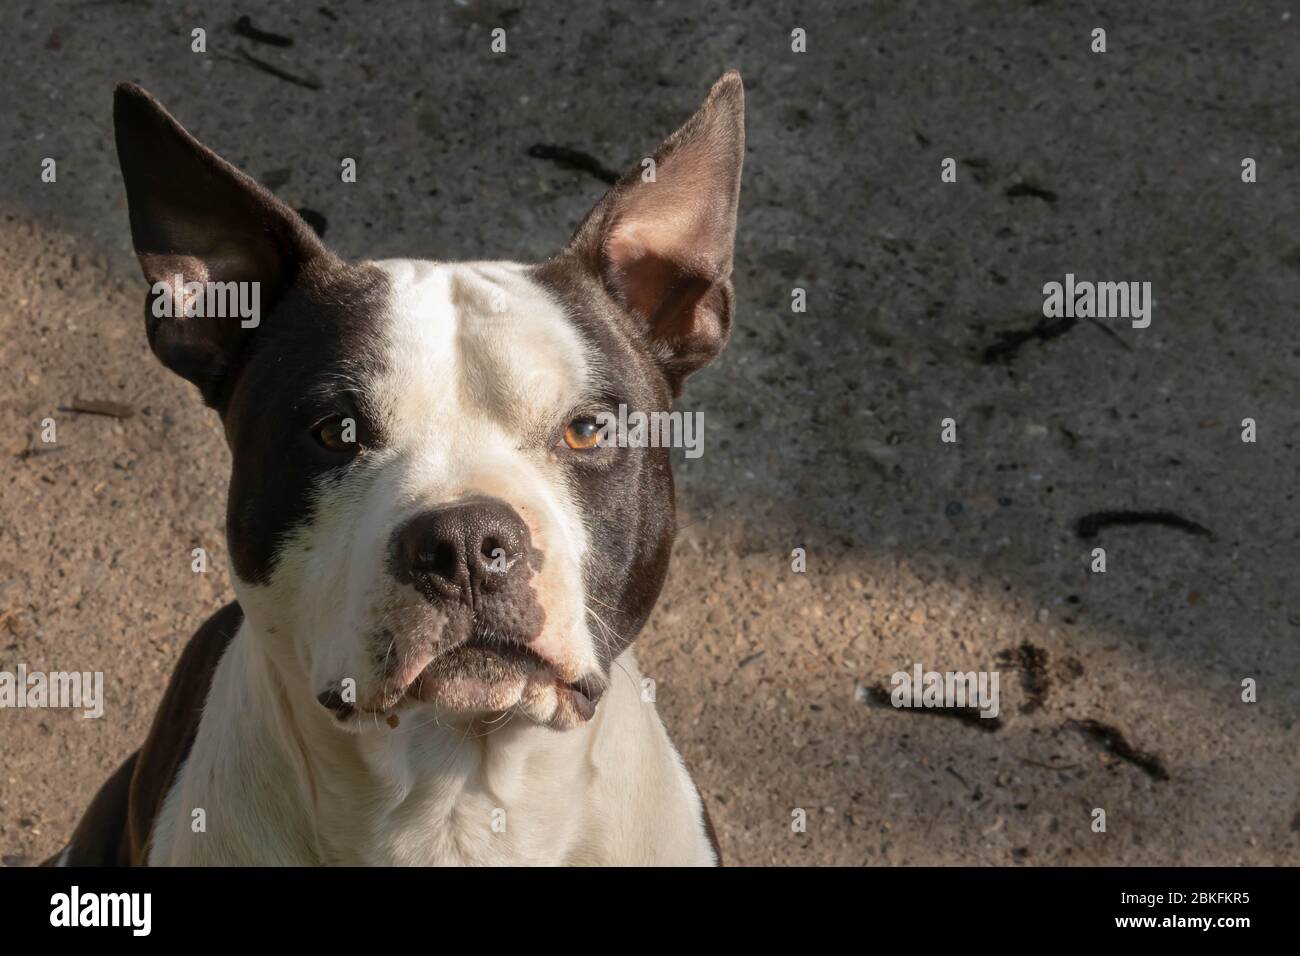 American staffordshire terrier. Black and white amstaff dog portrait. Stock Photo